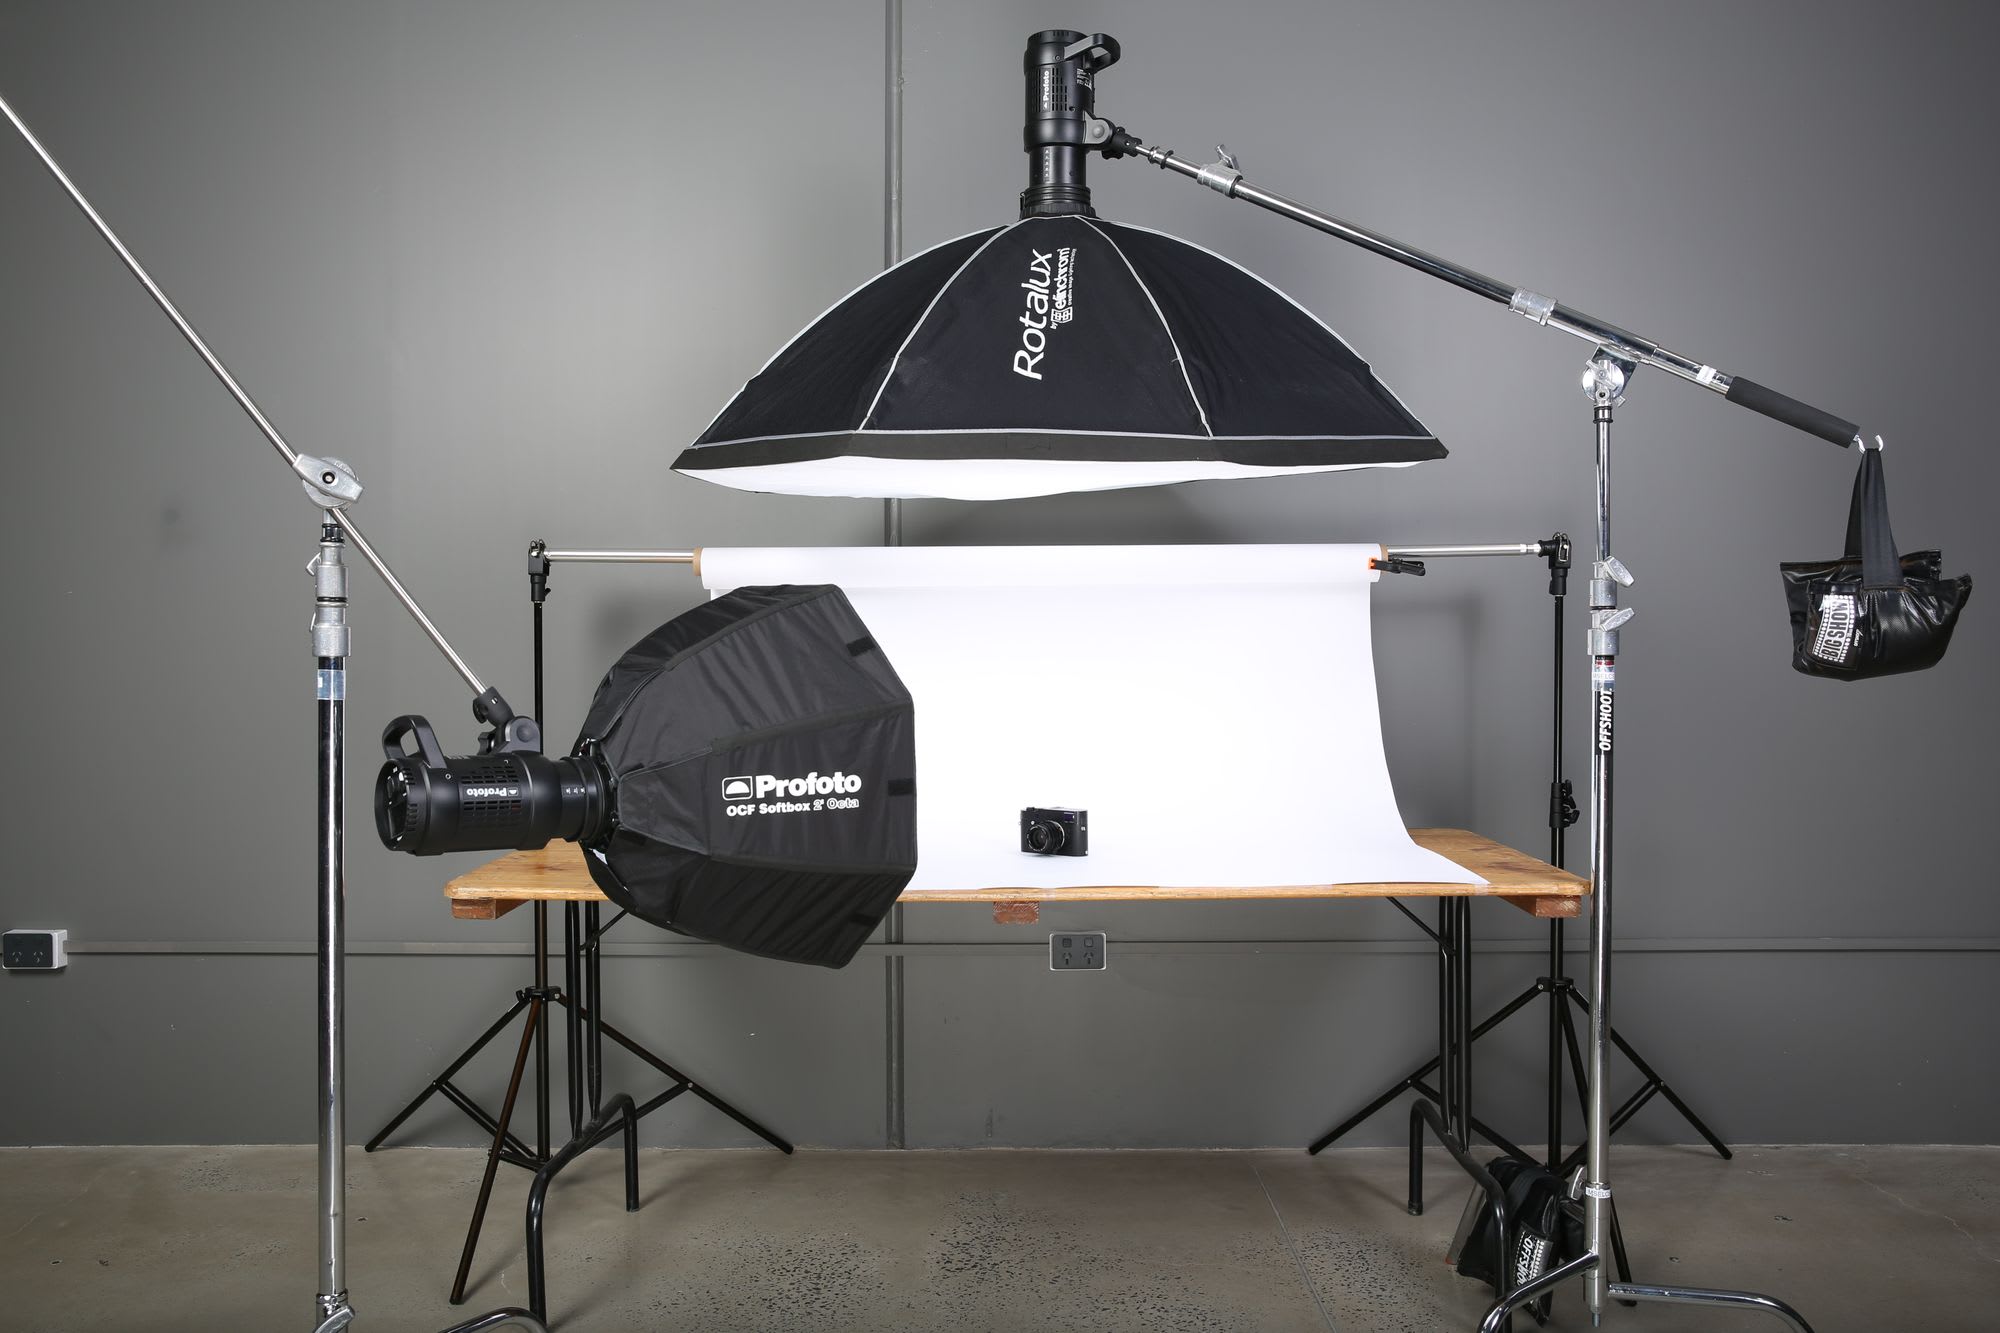 An Introduction To Product Photography